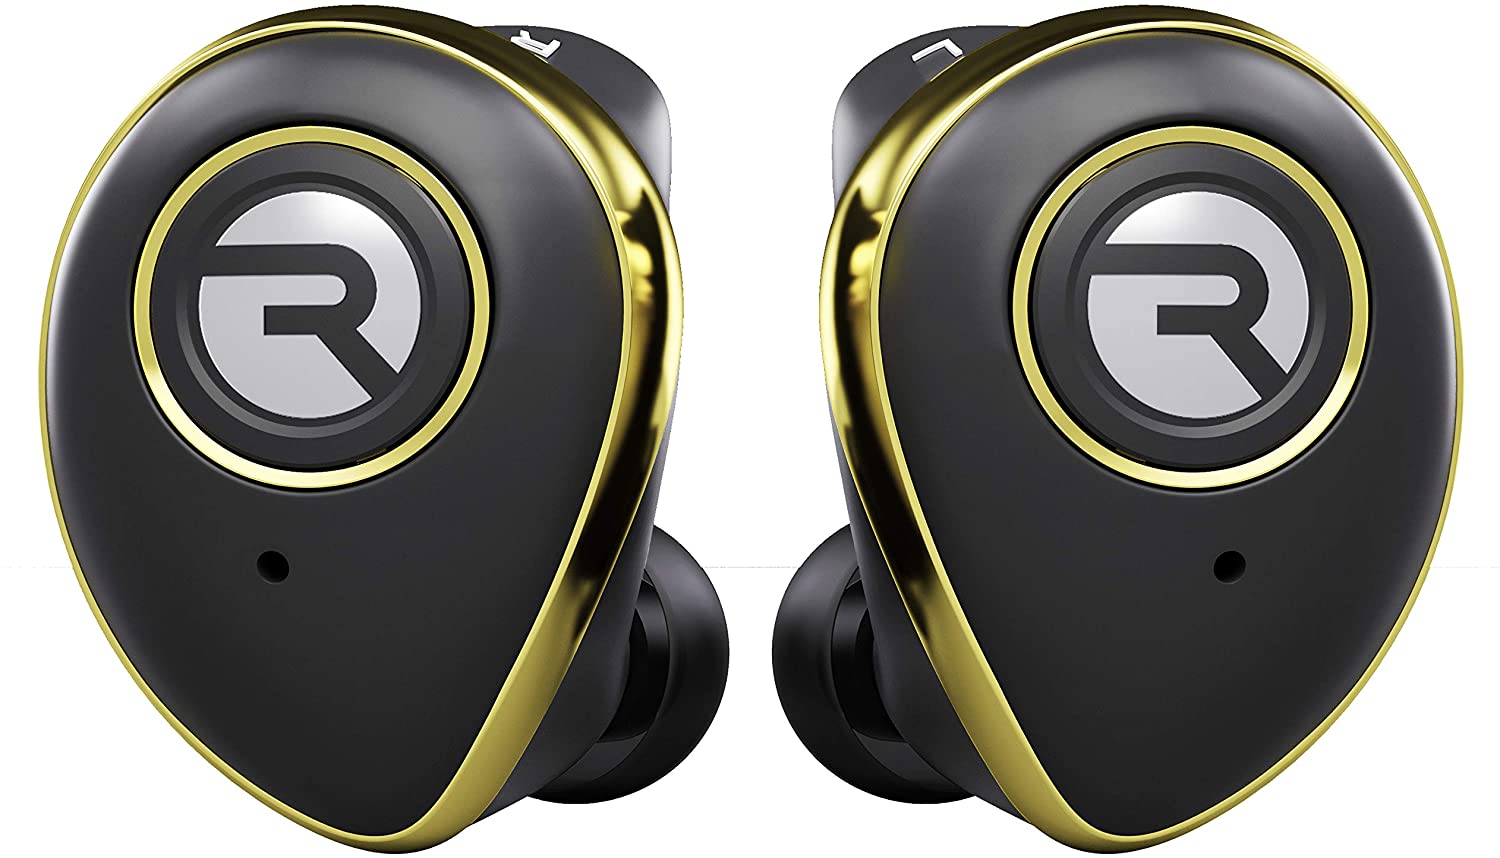 Raycon E50 Wireless Earbuds Headphones + Mic + Case Gold- Certified Refurbished